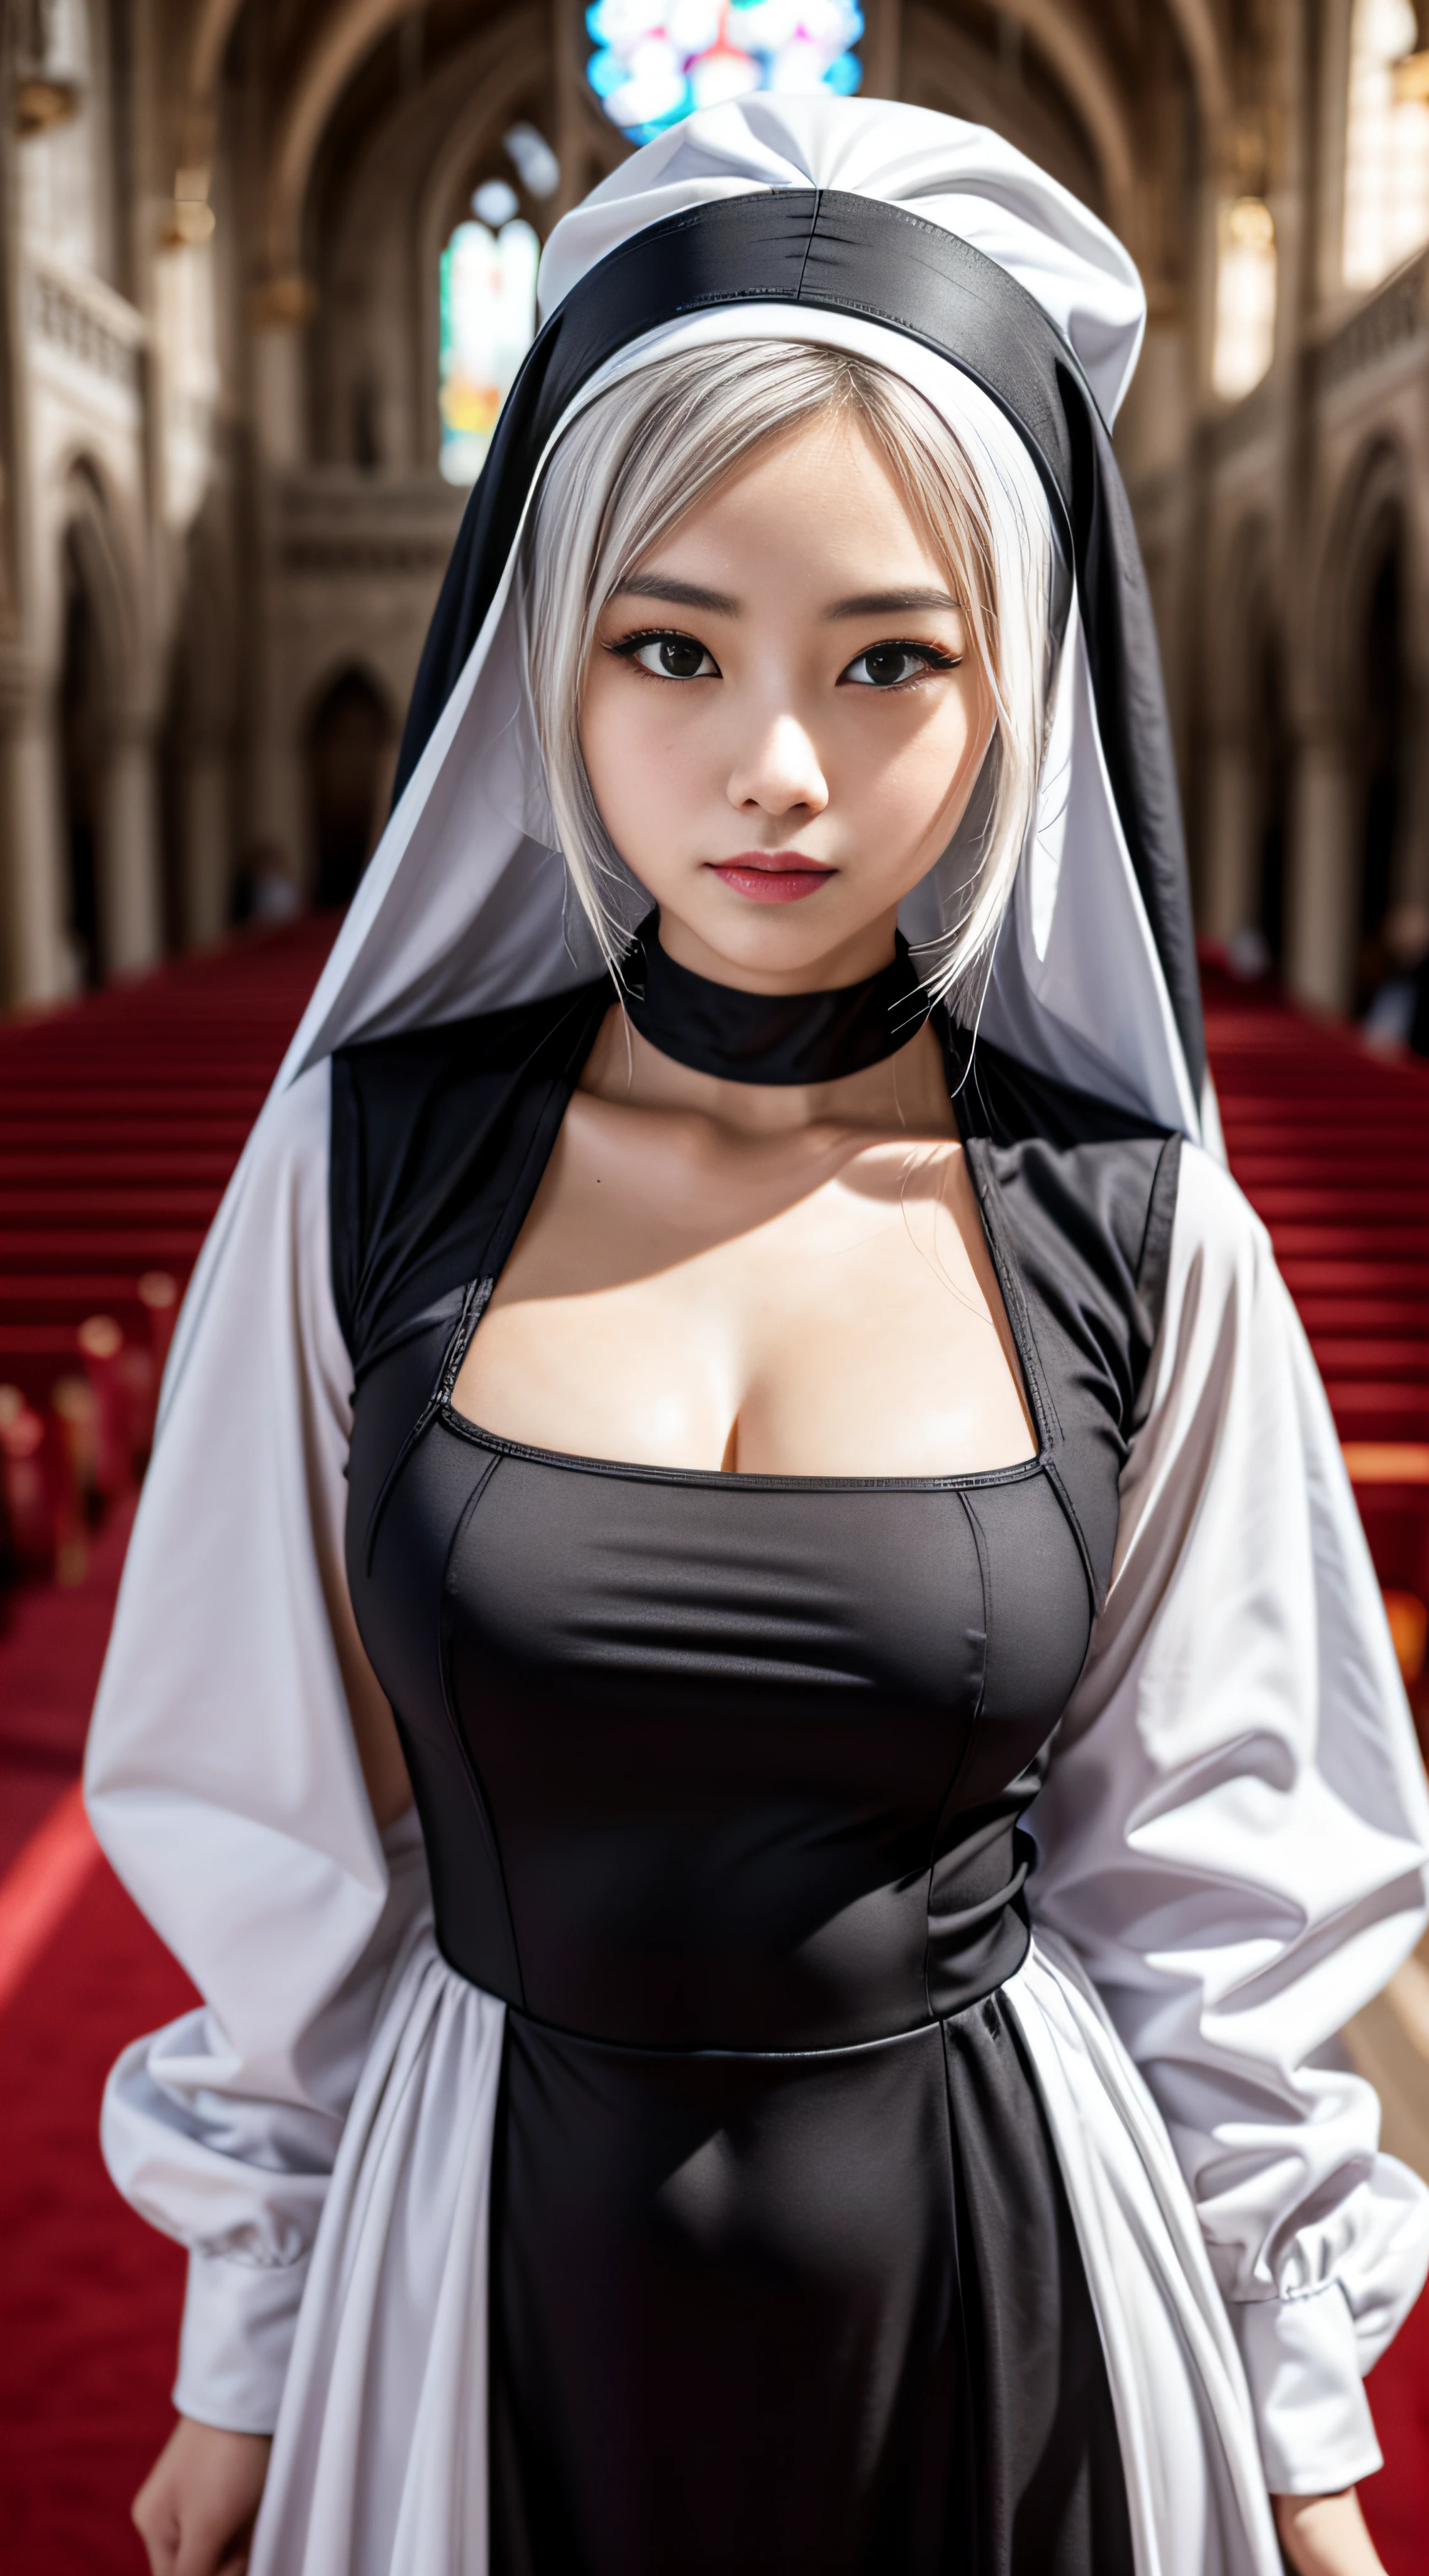 （（（Nuns wearing nun dresses and nun caps in church））），（（Clothing that exposes））Clothes and skin are soaked all over，Glowing skin，Sweaty skin，Works of masters，Best image quality，Higher quality，high detal，Ultra-high resolution，8K resolution，perfect hand，full body shot shot，Exquisite facial features，s the perfect face，（Reality：1.4），